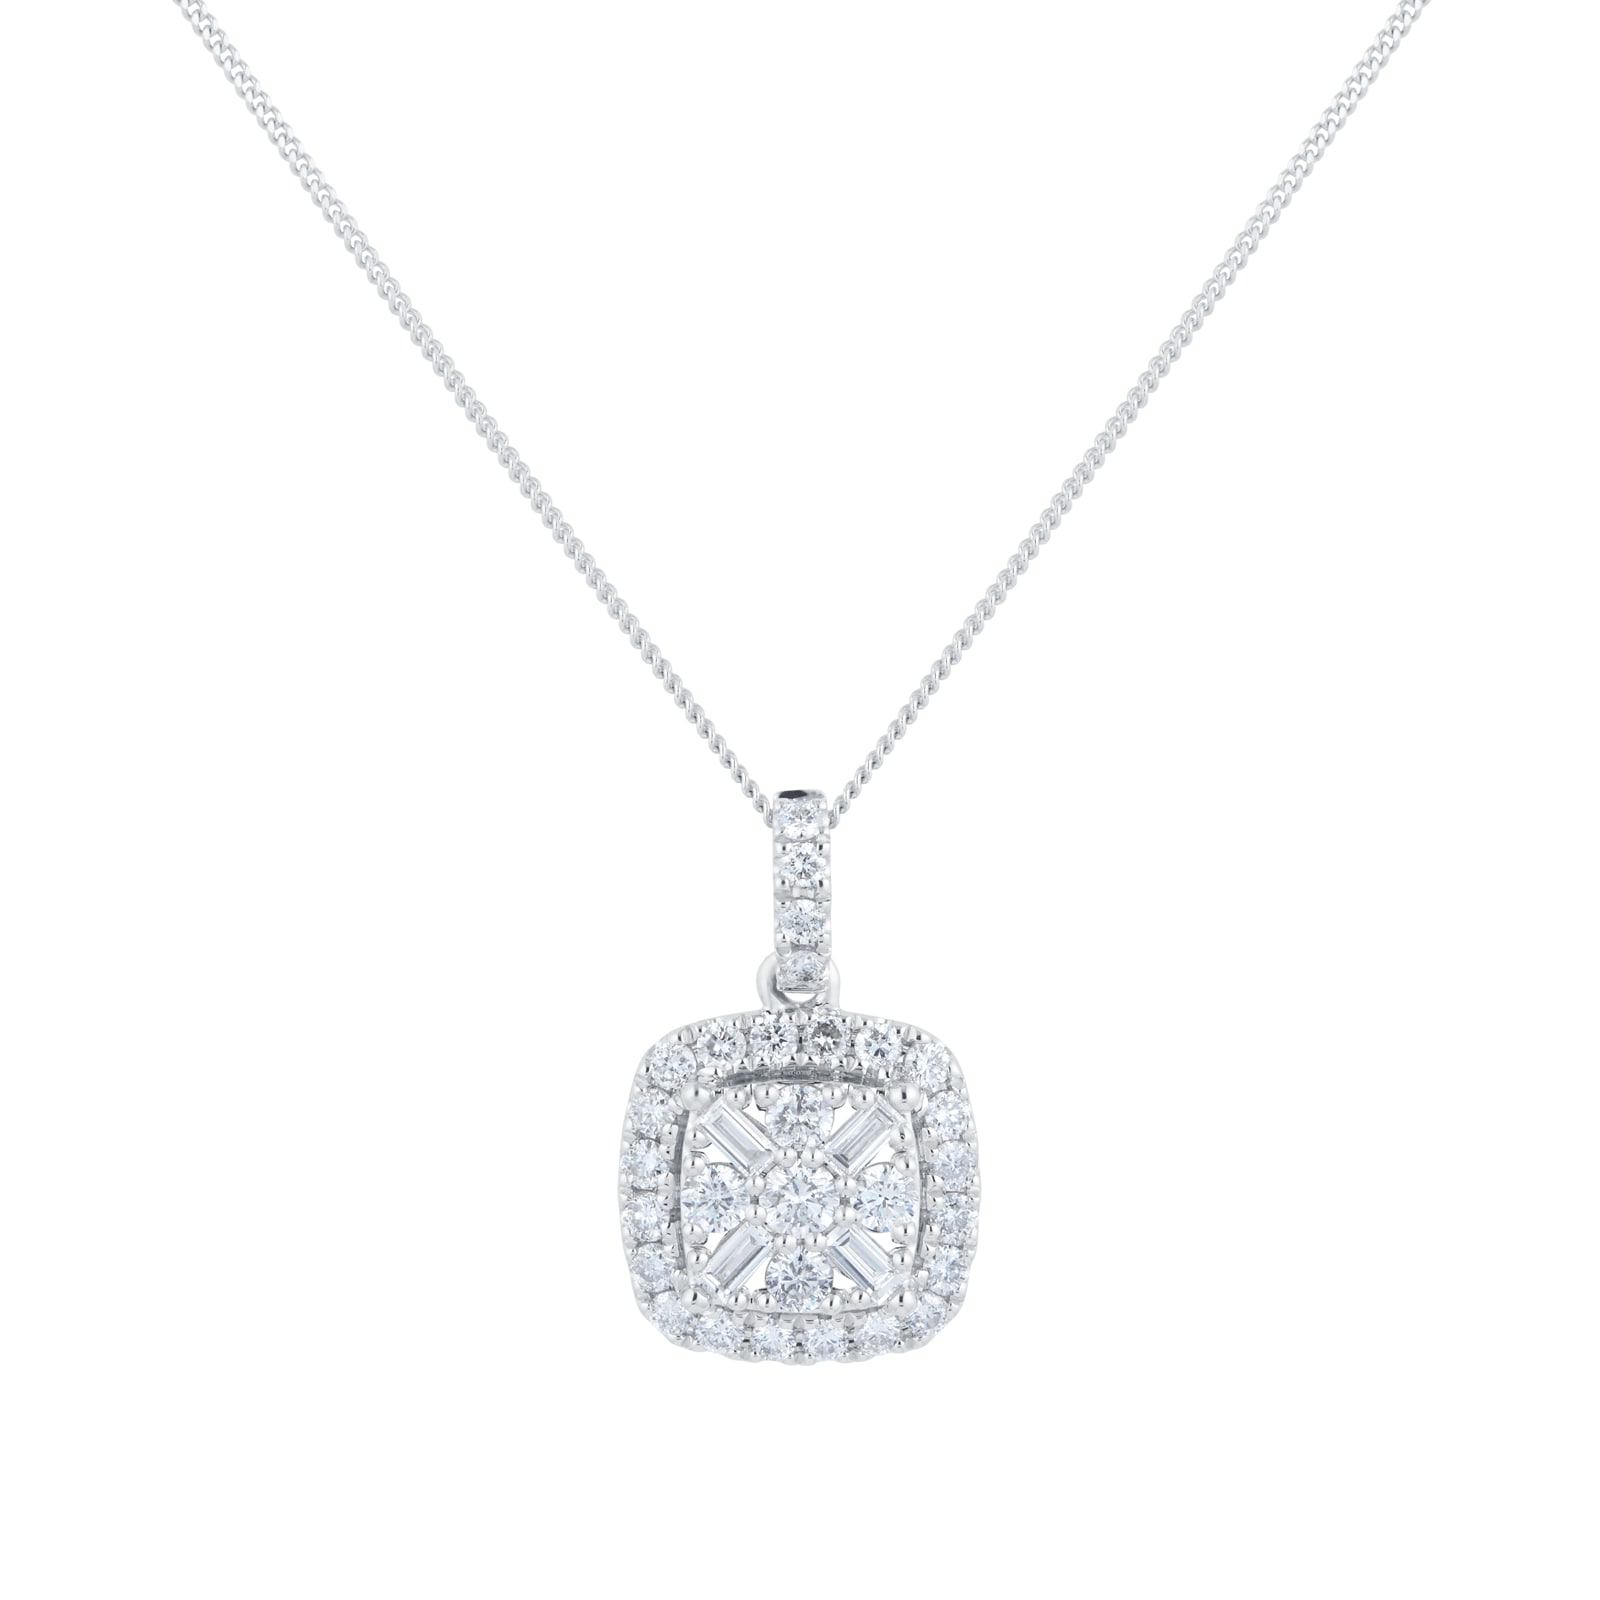 Diamond Tennis Necklace - The Clear Cut Collection 14K White / 0.03ct